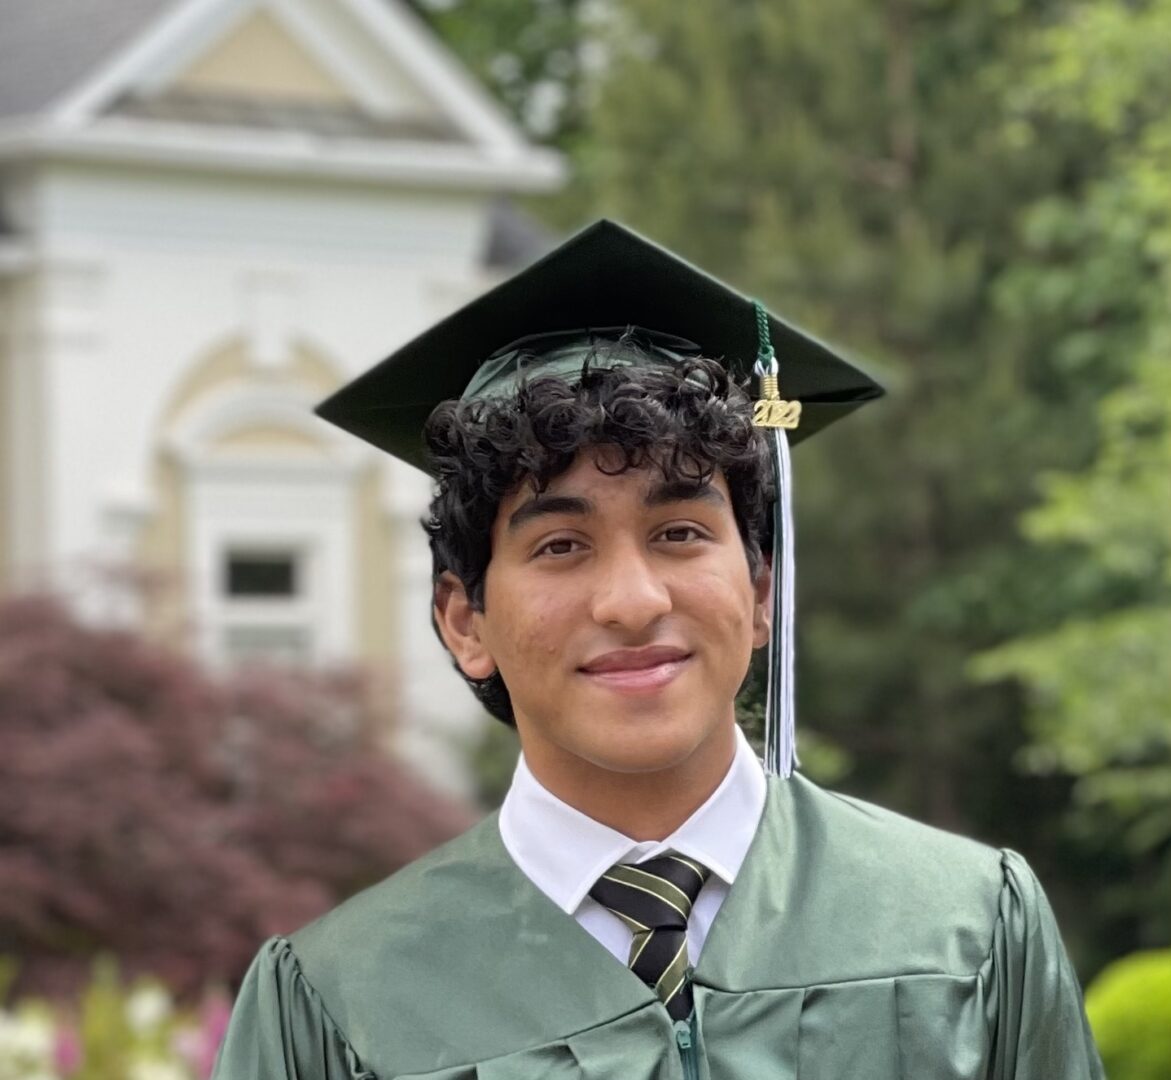 A young man in graduation attire standing outside.